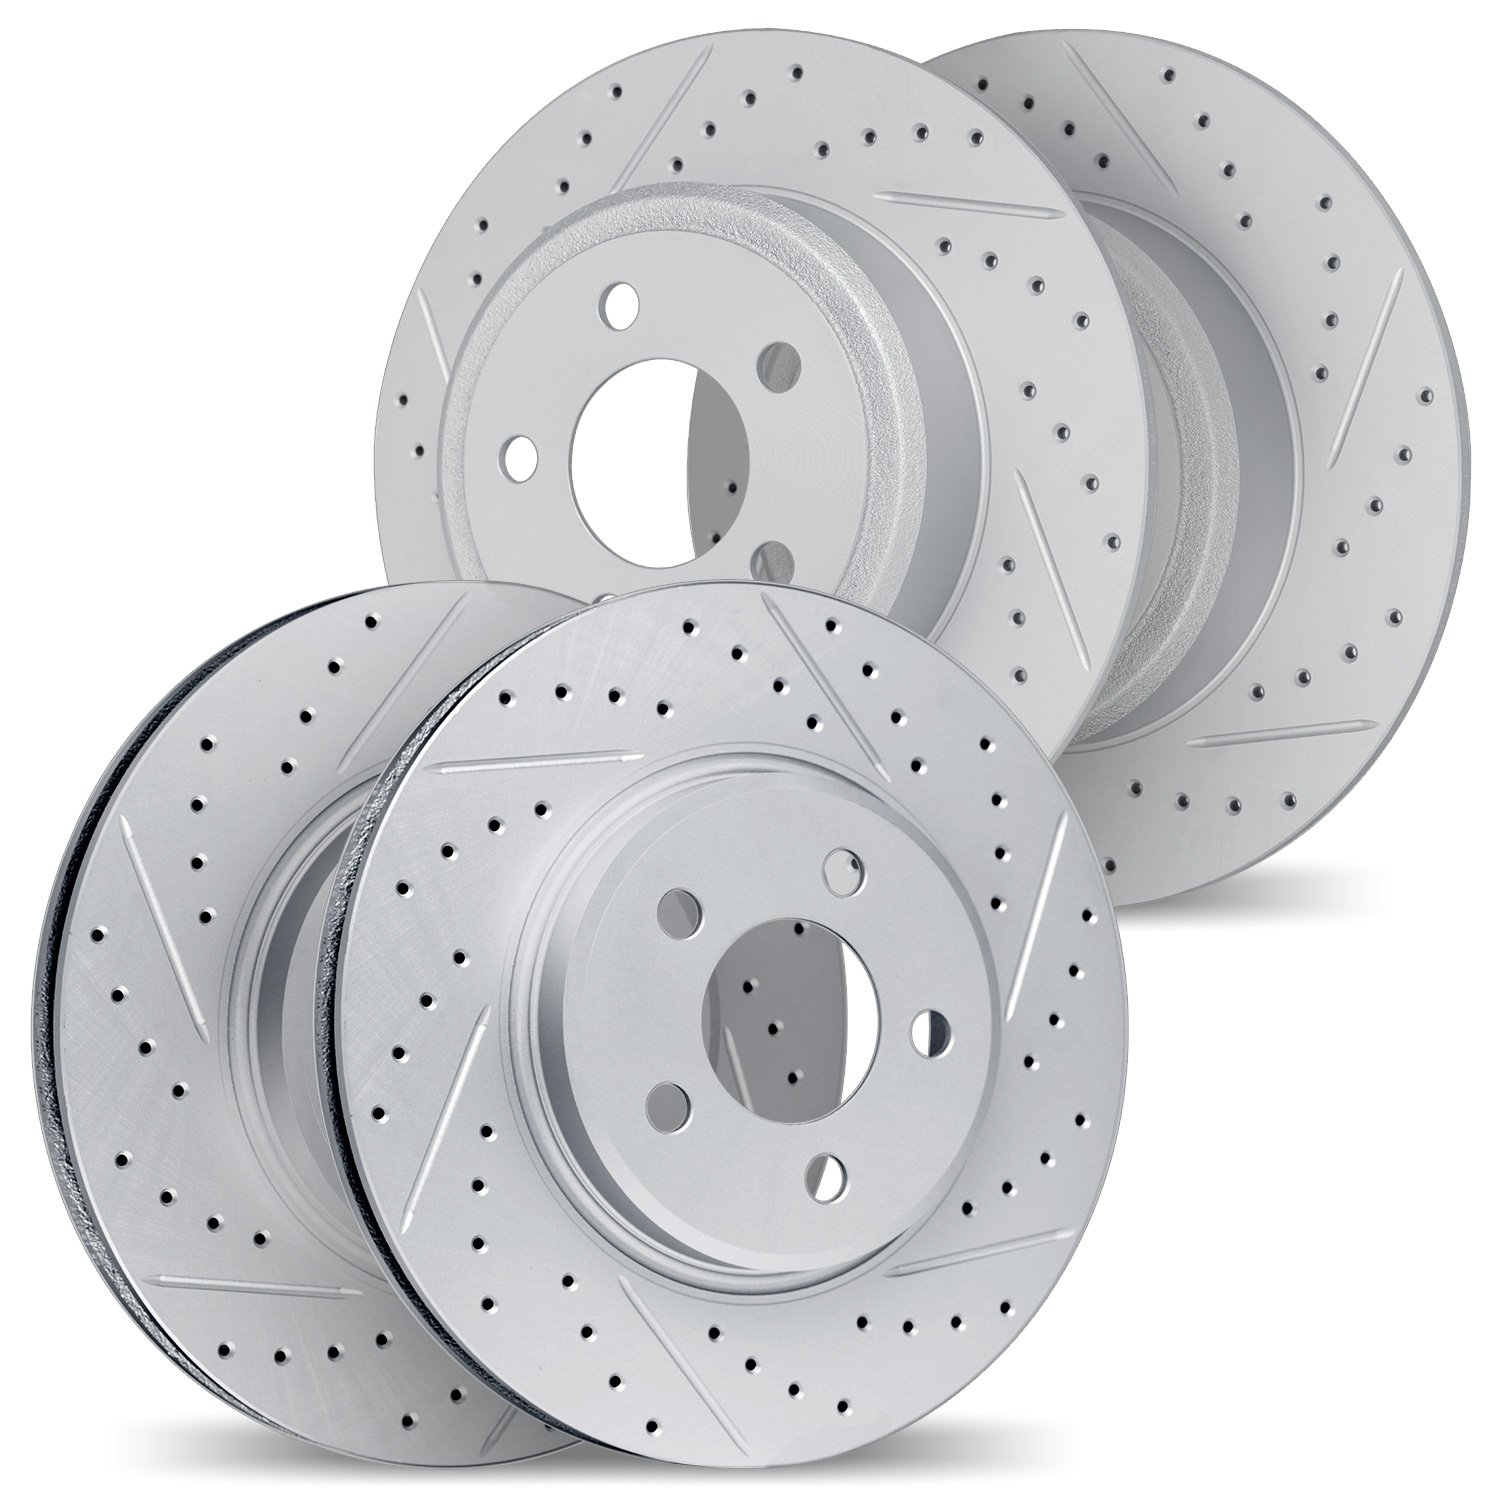 2004-47061 Geoperformance Drilled/Slotted Brake Rotors, 2008-2010 GM, Position: Front and Rear